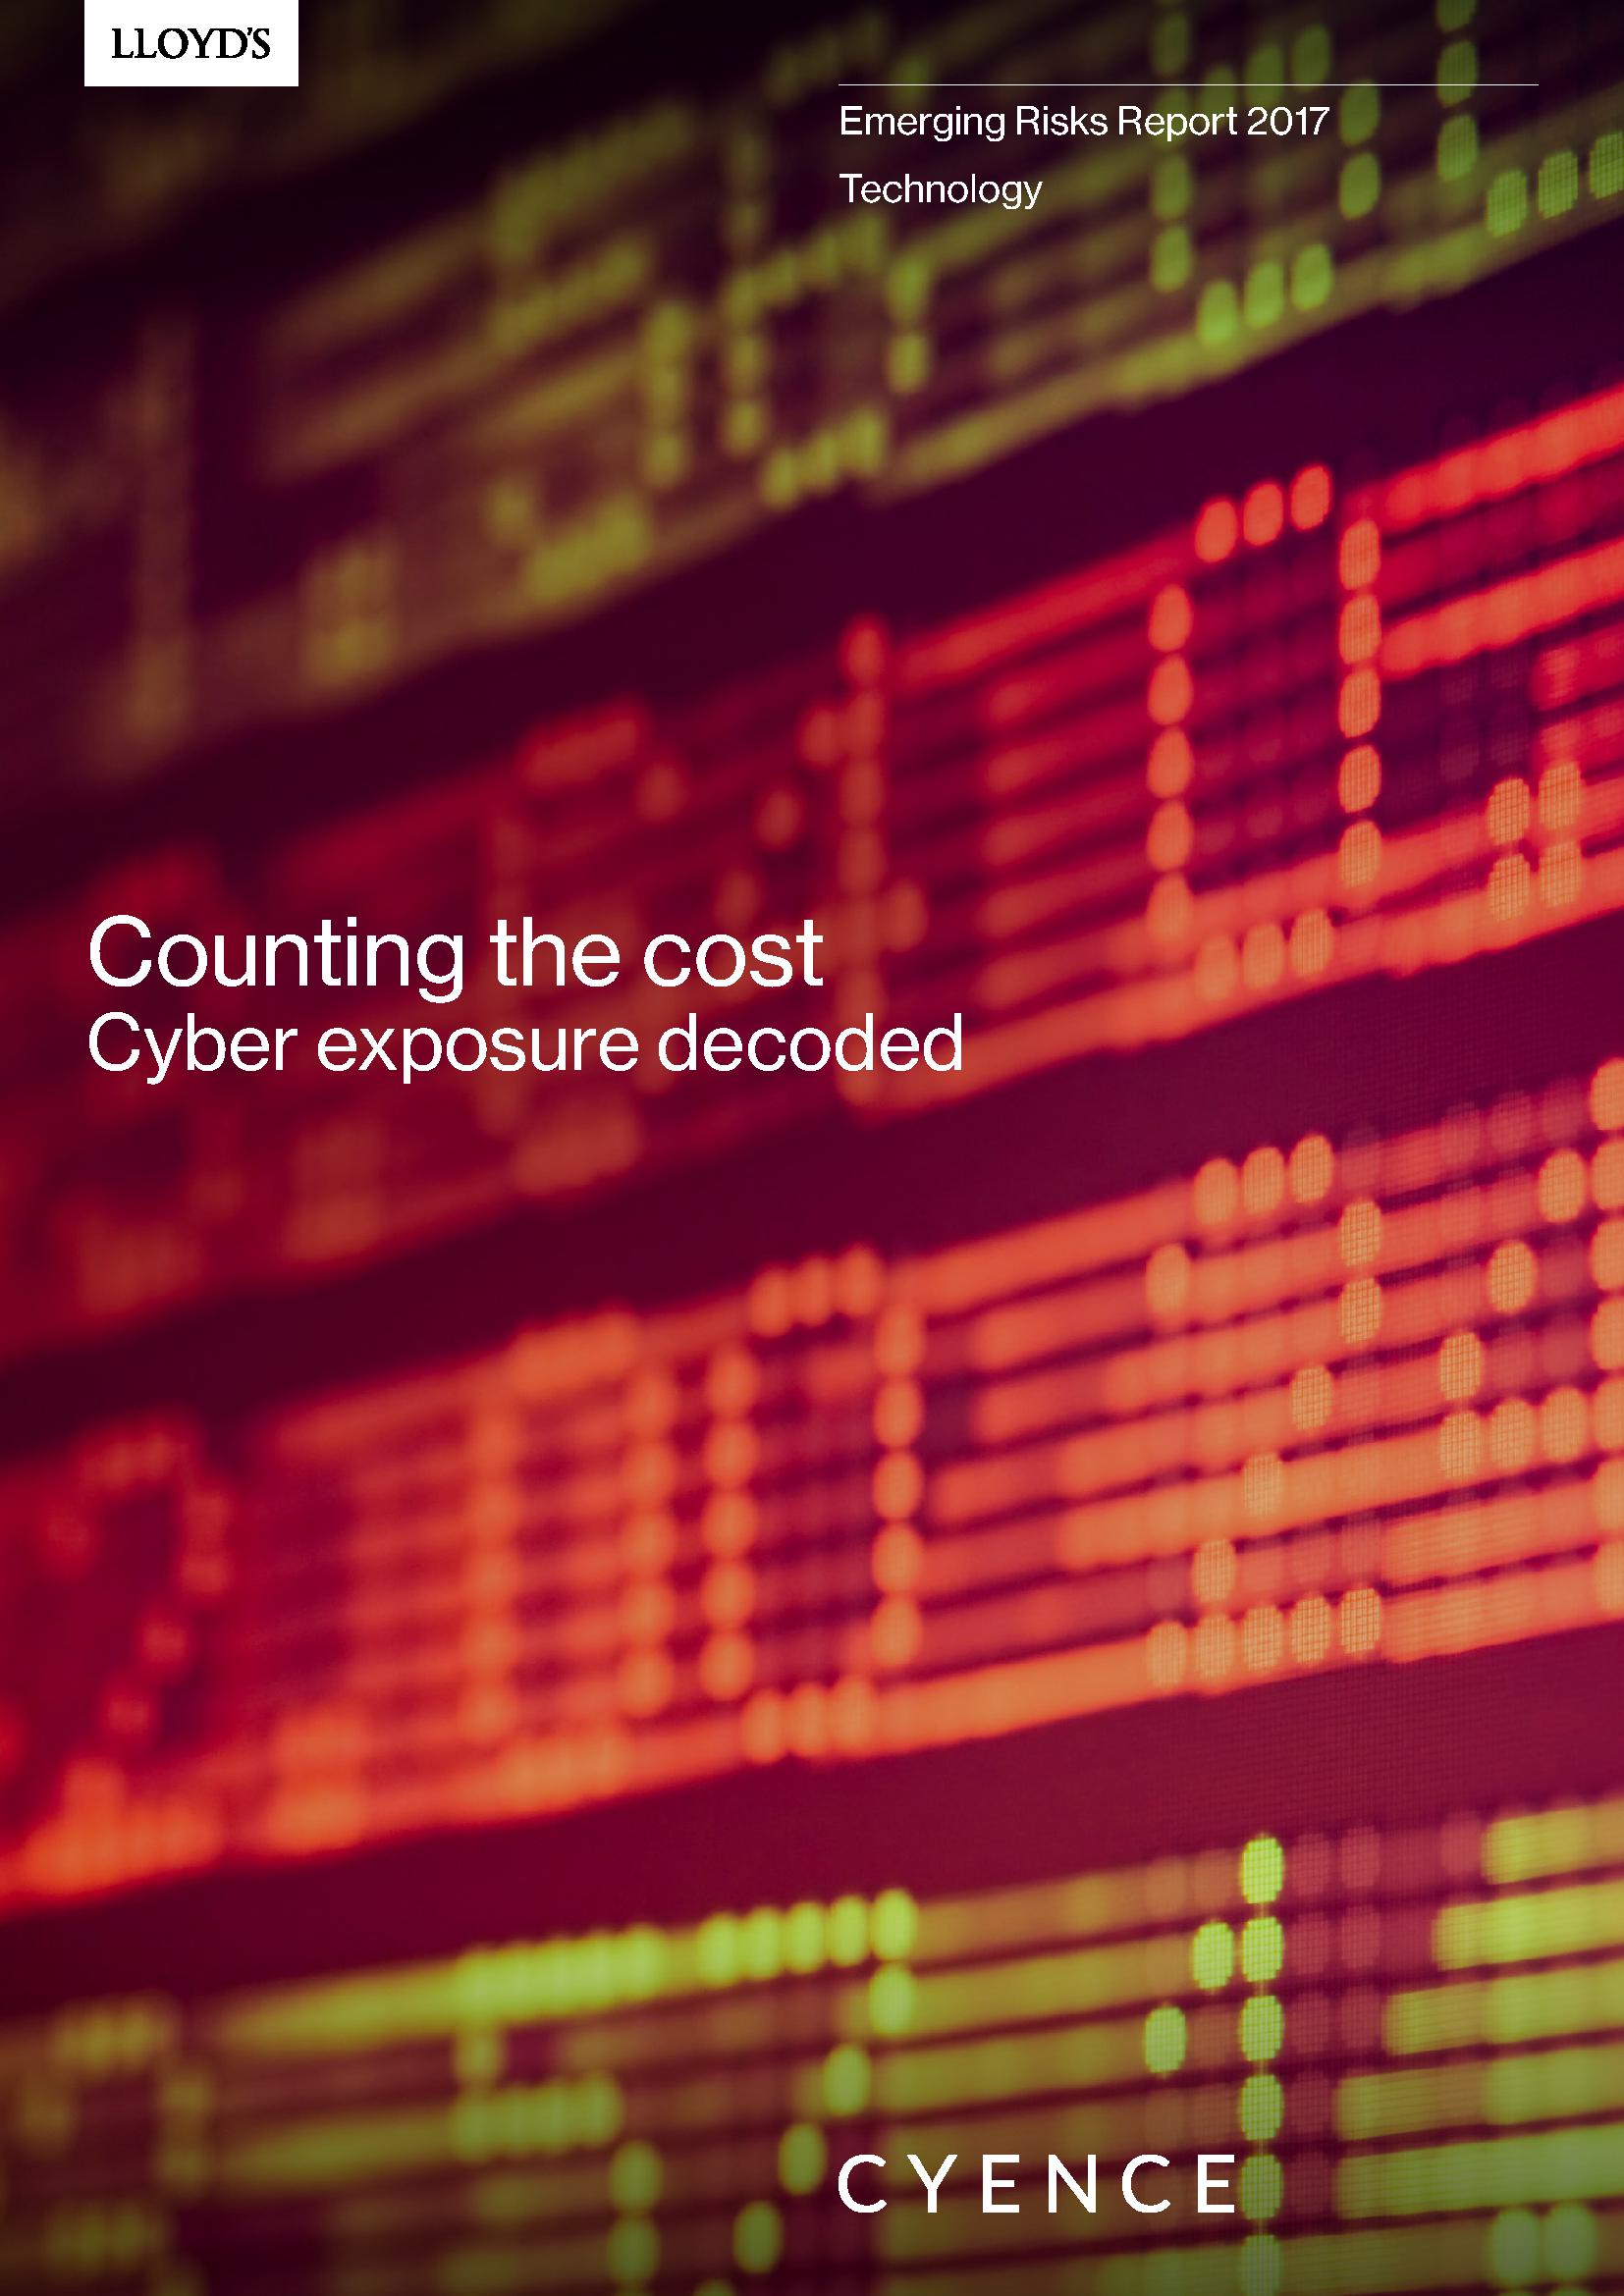 Counting the cost: Cyber exposure decoded